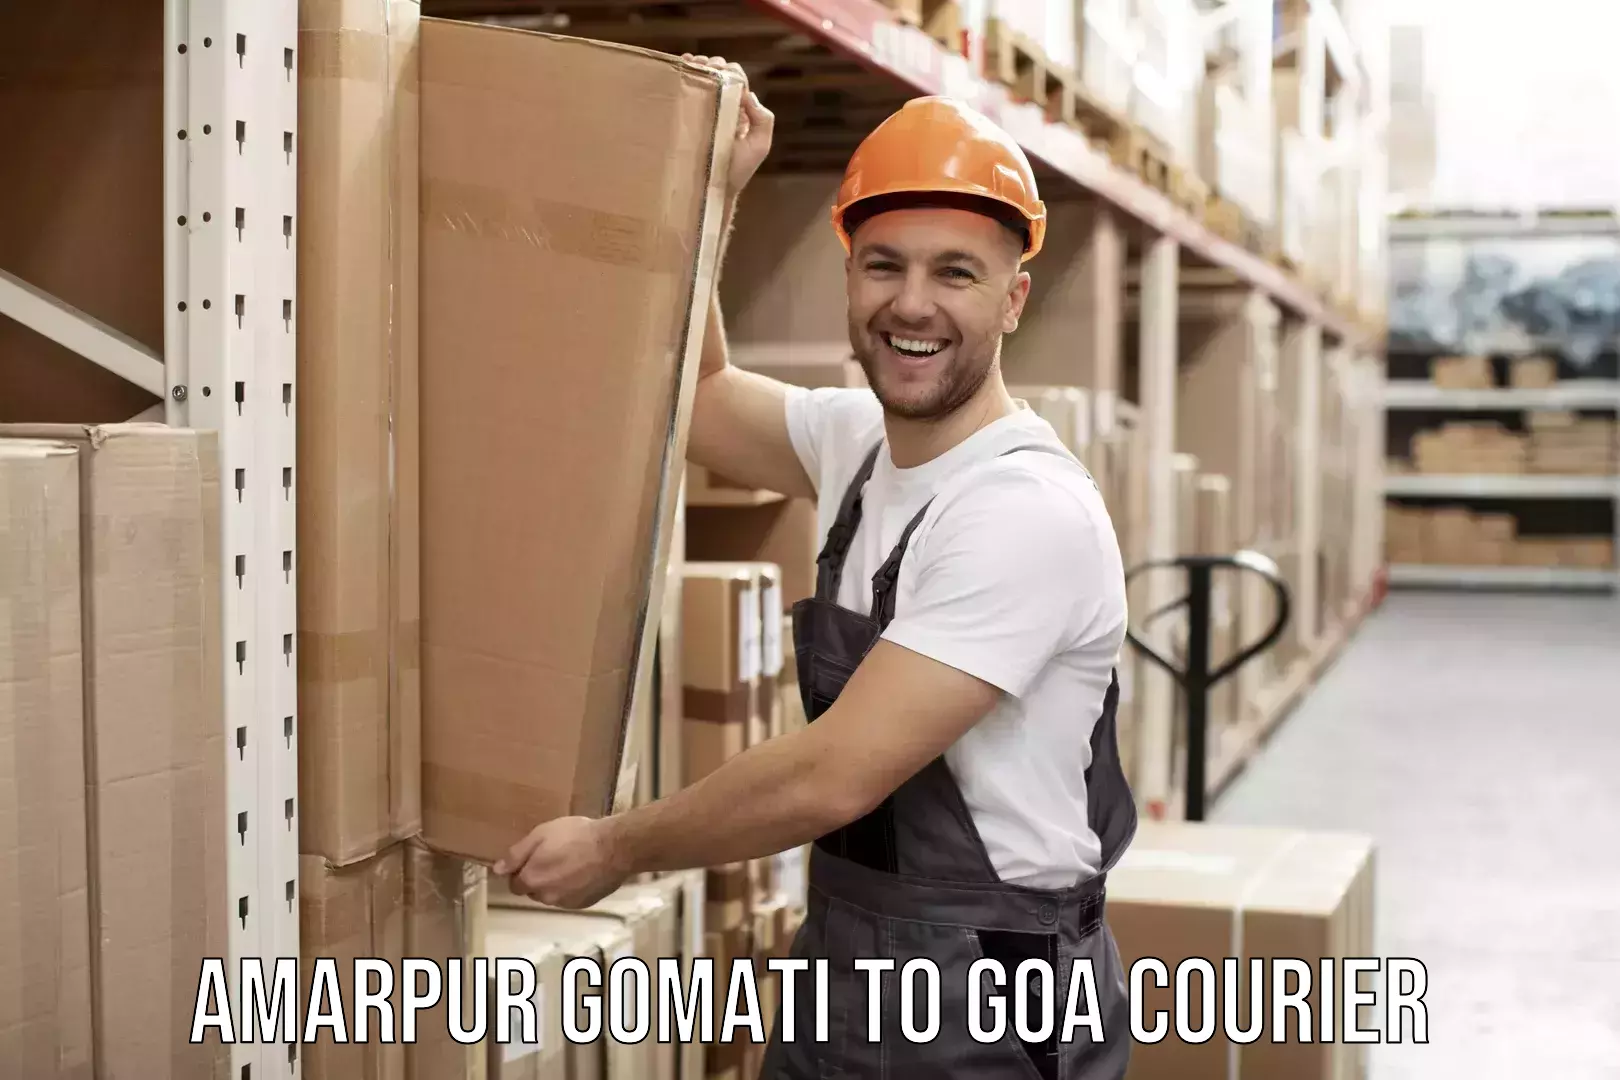 Professional movers and packers Amarpur Gomati to Goa